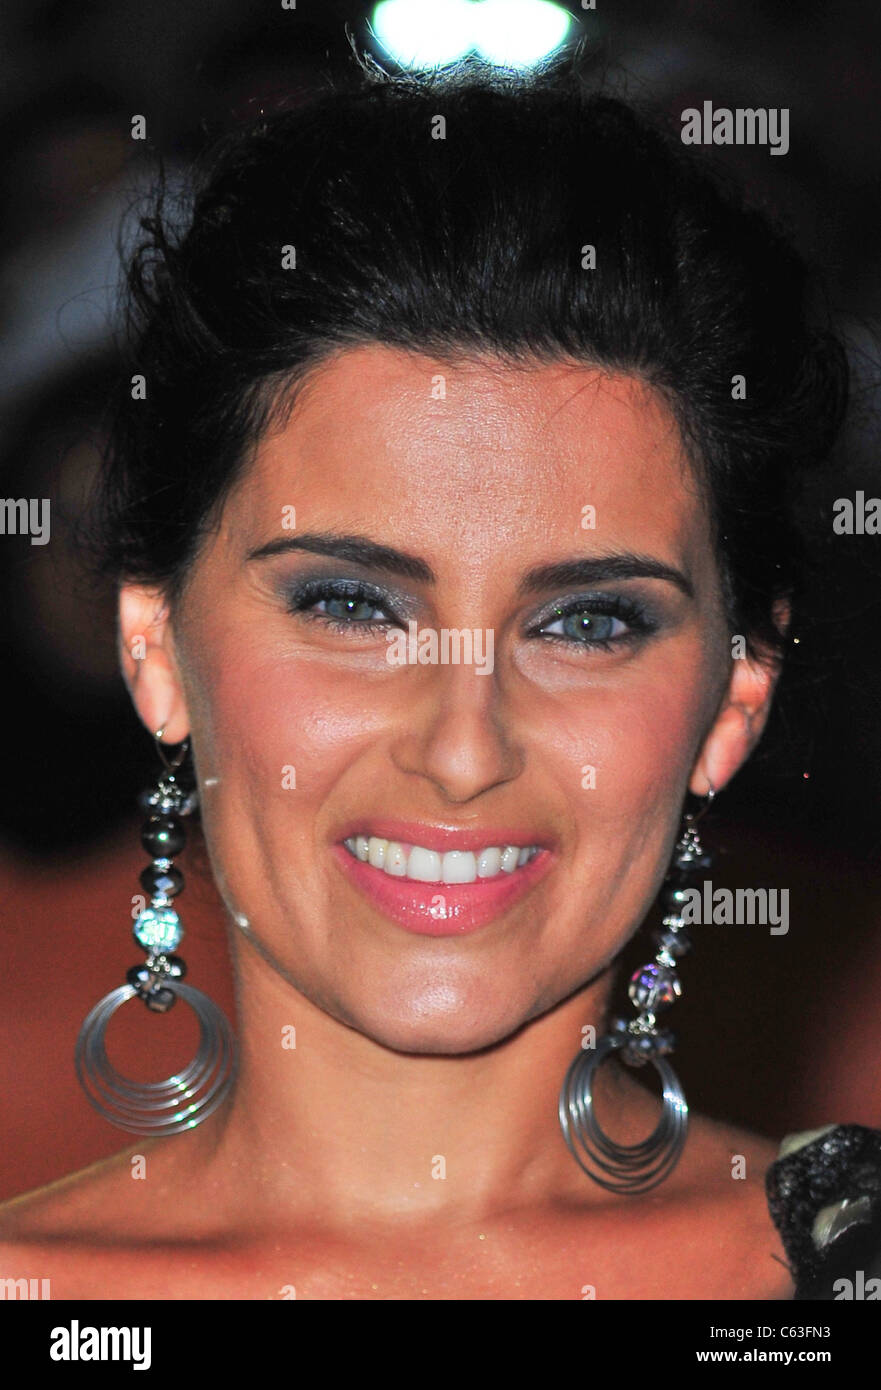 Nelly Furtado at arrivals for SCORE: A HOCKEY MUSICAL Premiere at Toronto International Film Festival Opening Night Gala, Roy Thomson Hall, Toronto, ON September 9, 2010. Photo By: Gregorio T. Binuya/Everett Collection Stock Photo